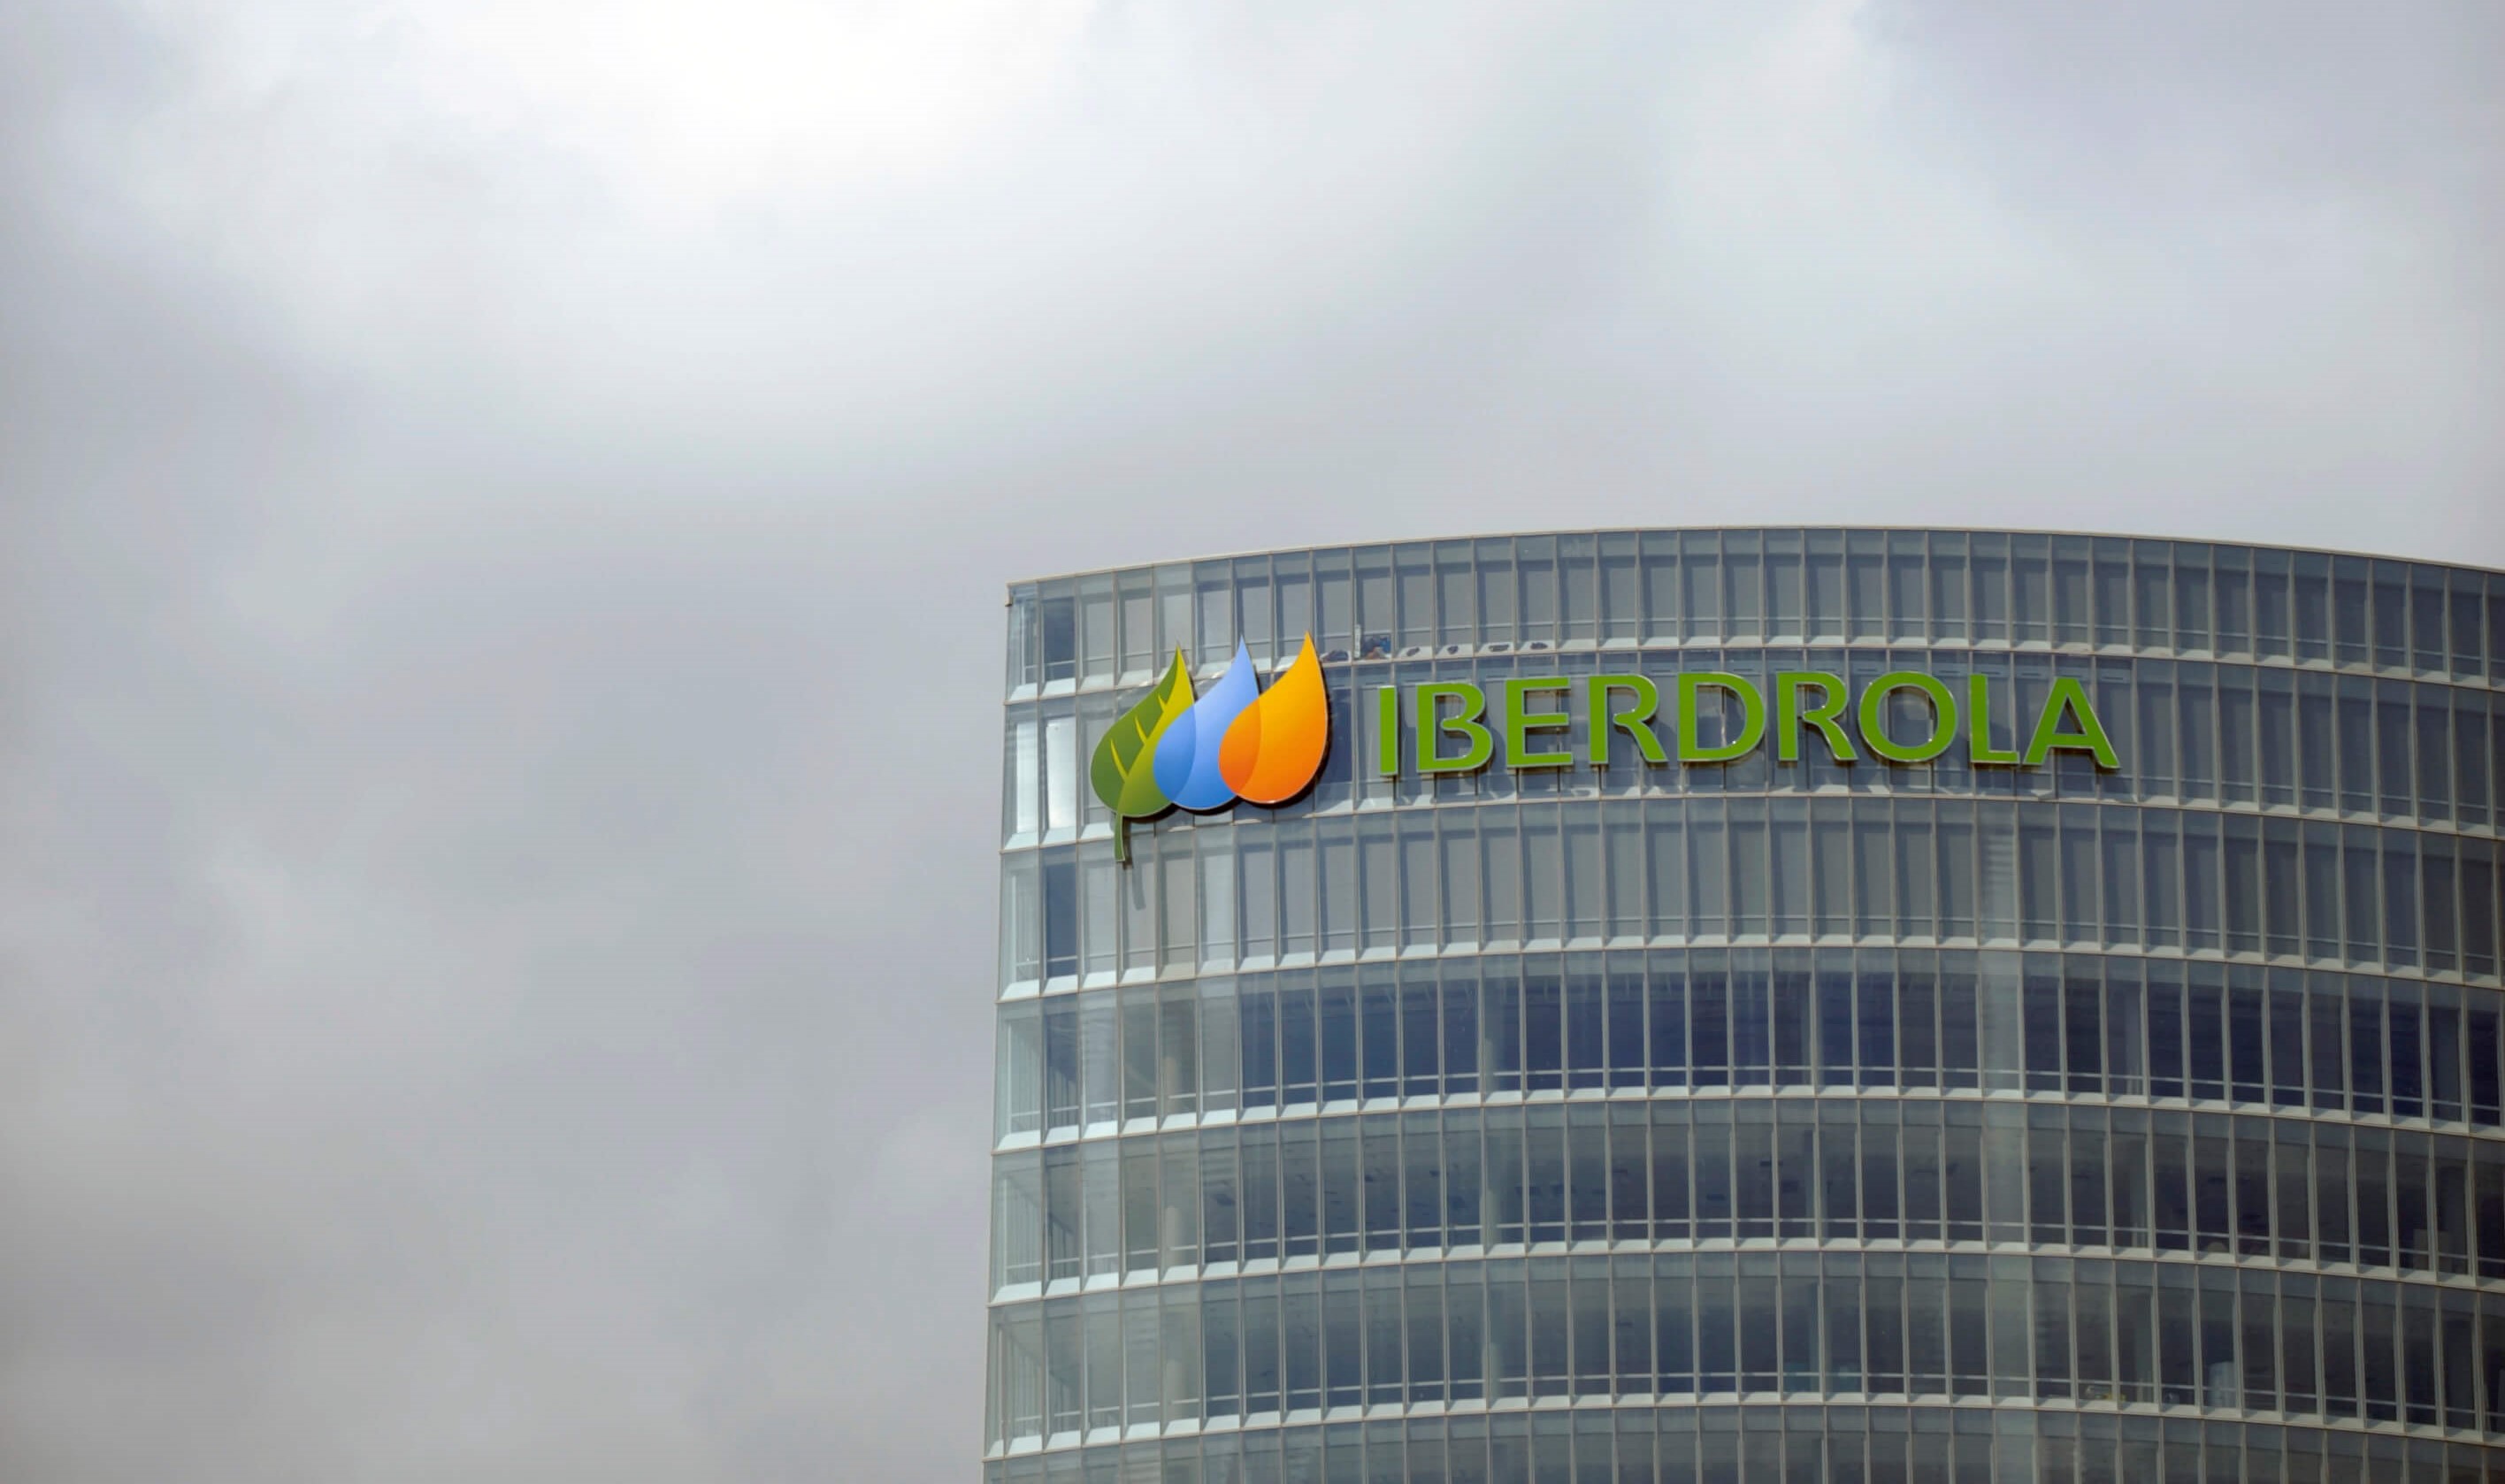 Iberdrola headquarters in Bilbao, photo showing the top of the building with the company's logo